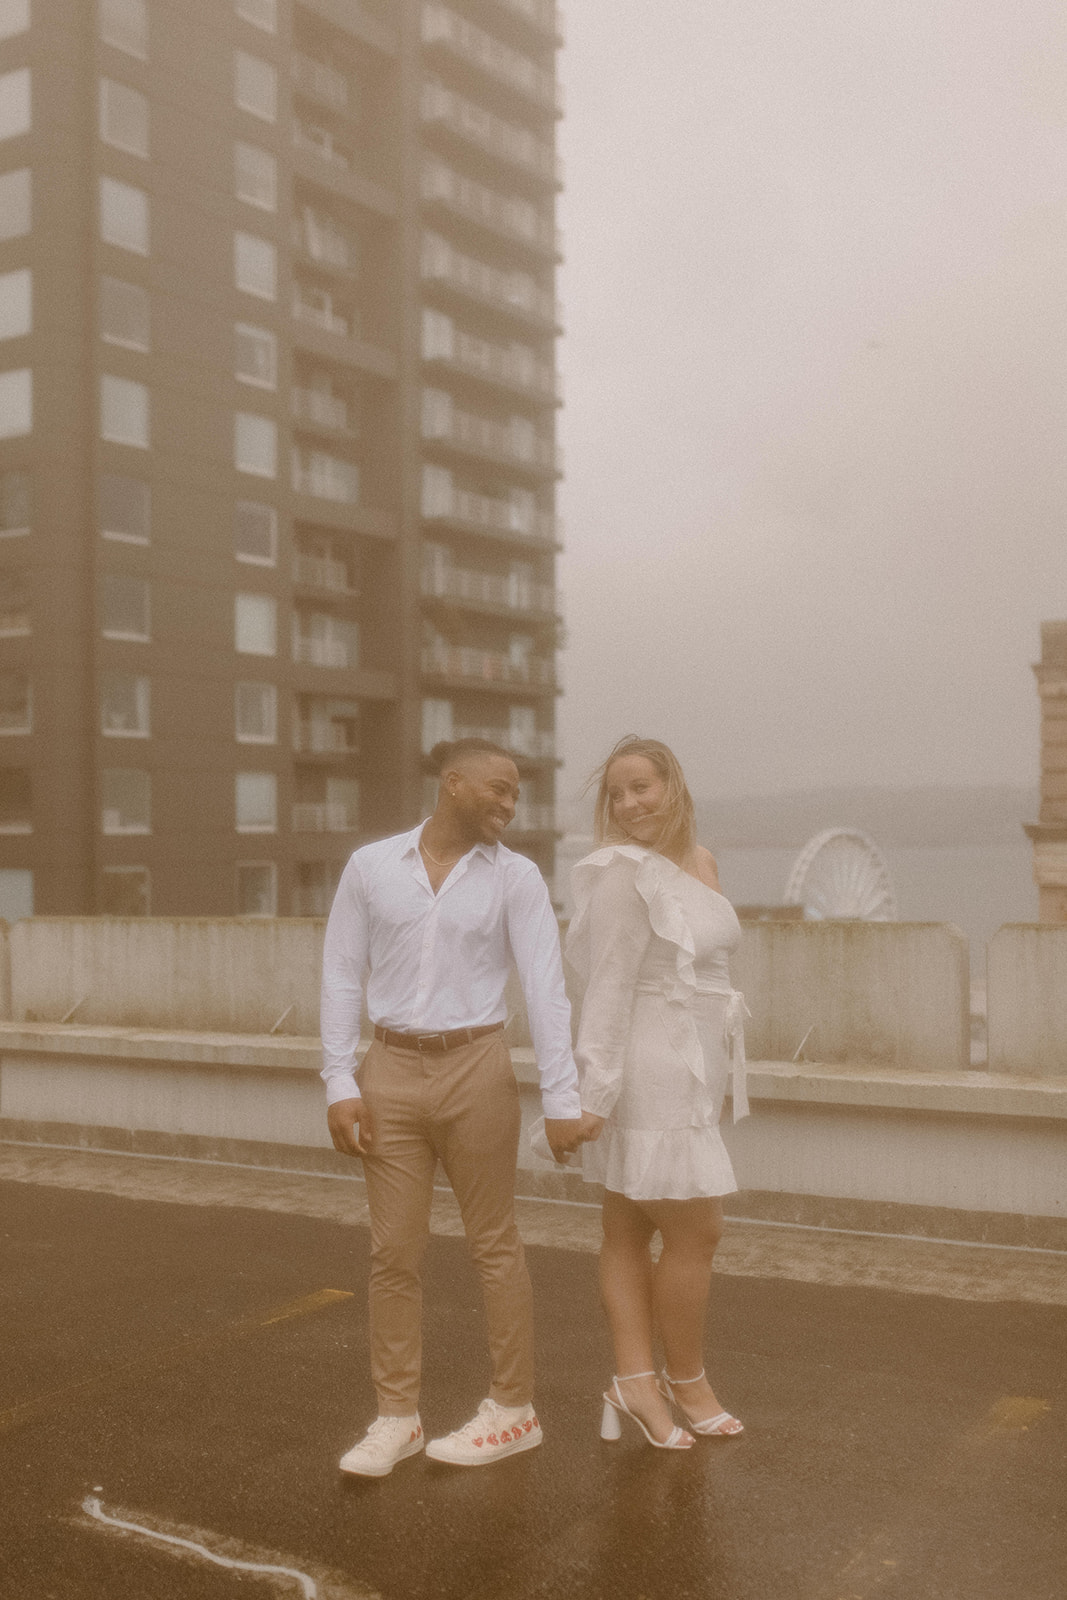 Couples photos in the rain for a rooftop engagement session
